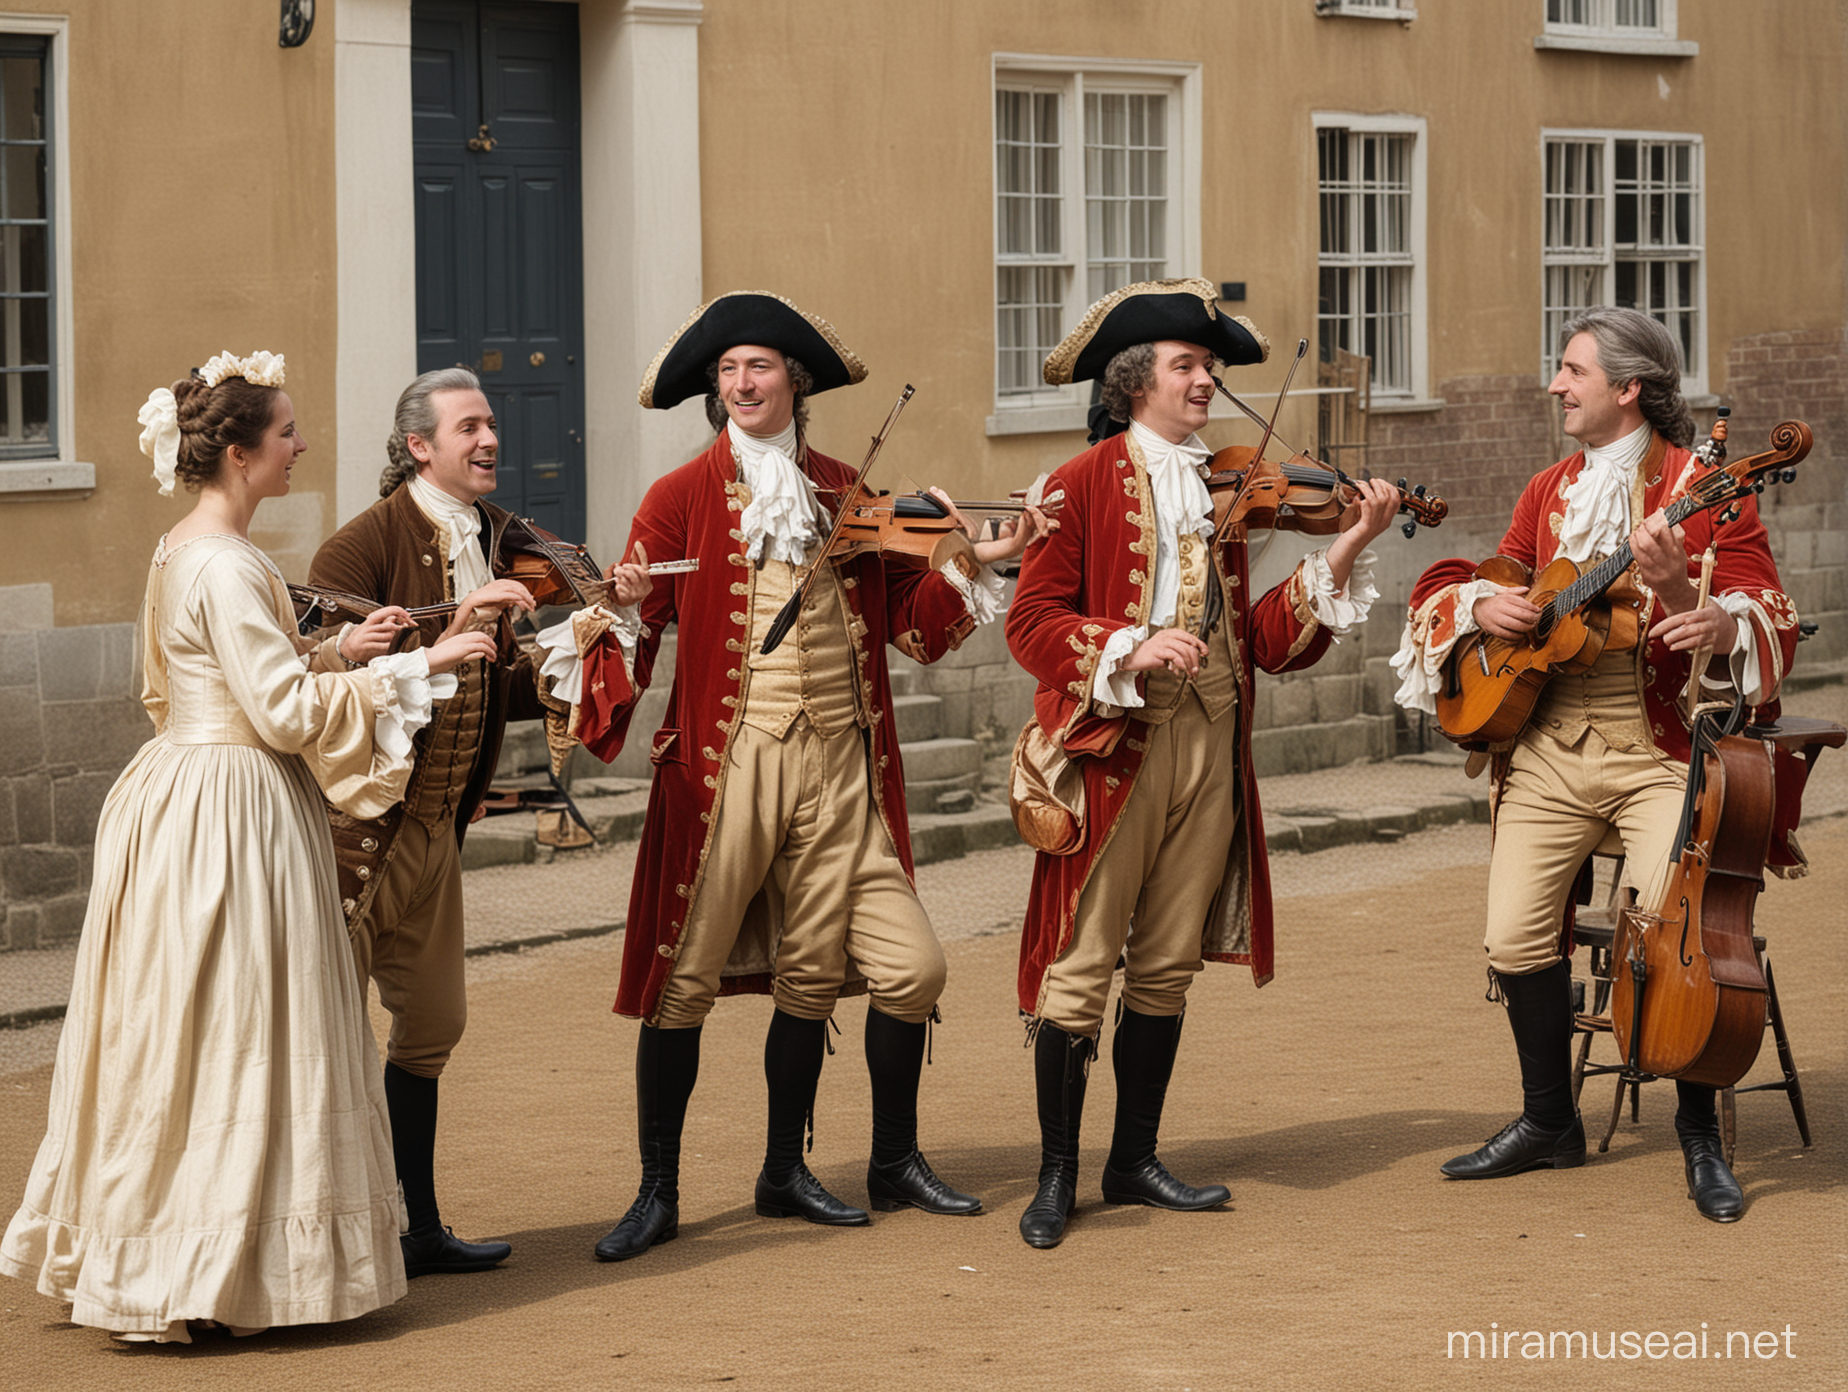 A group of 18th century musician men and women playing instruments while talking